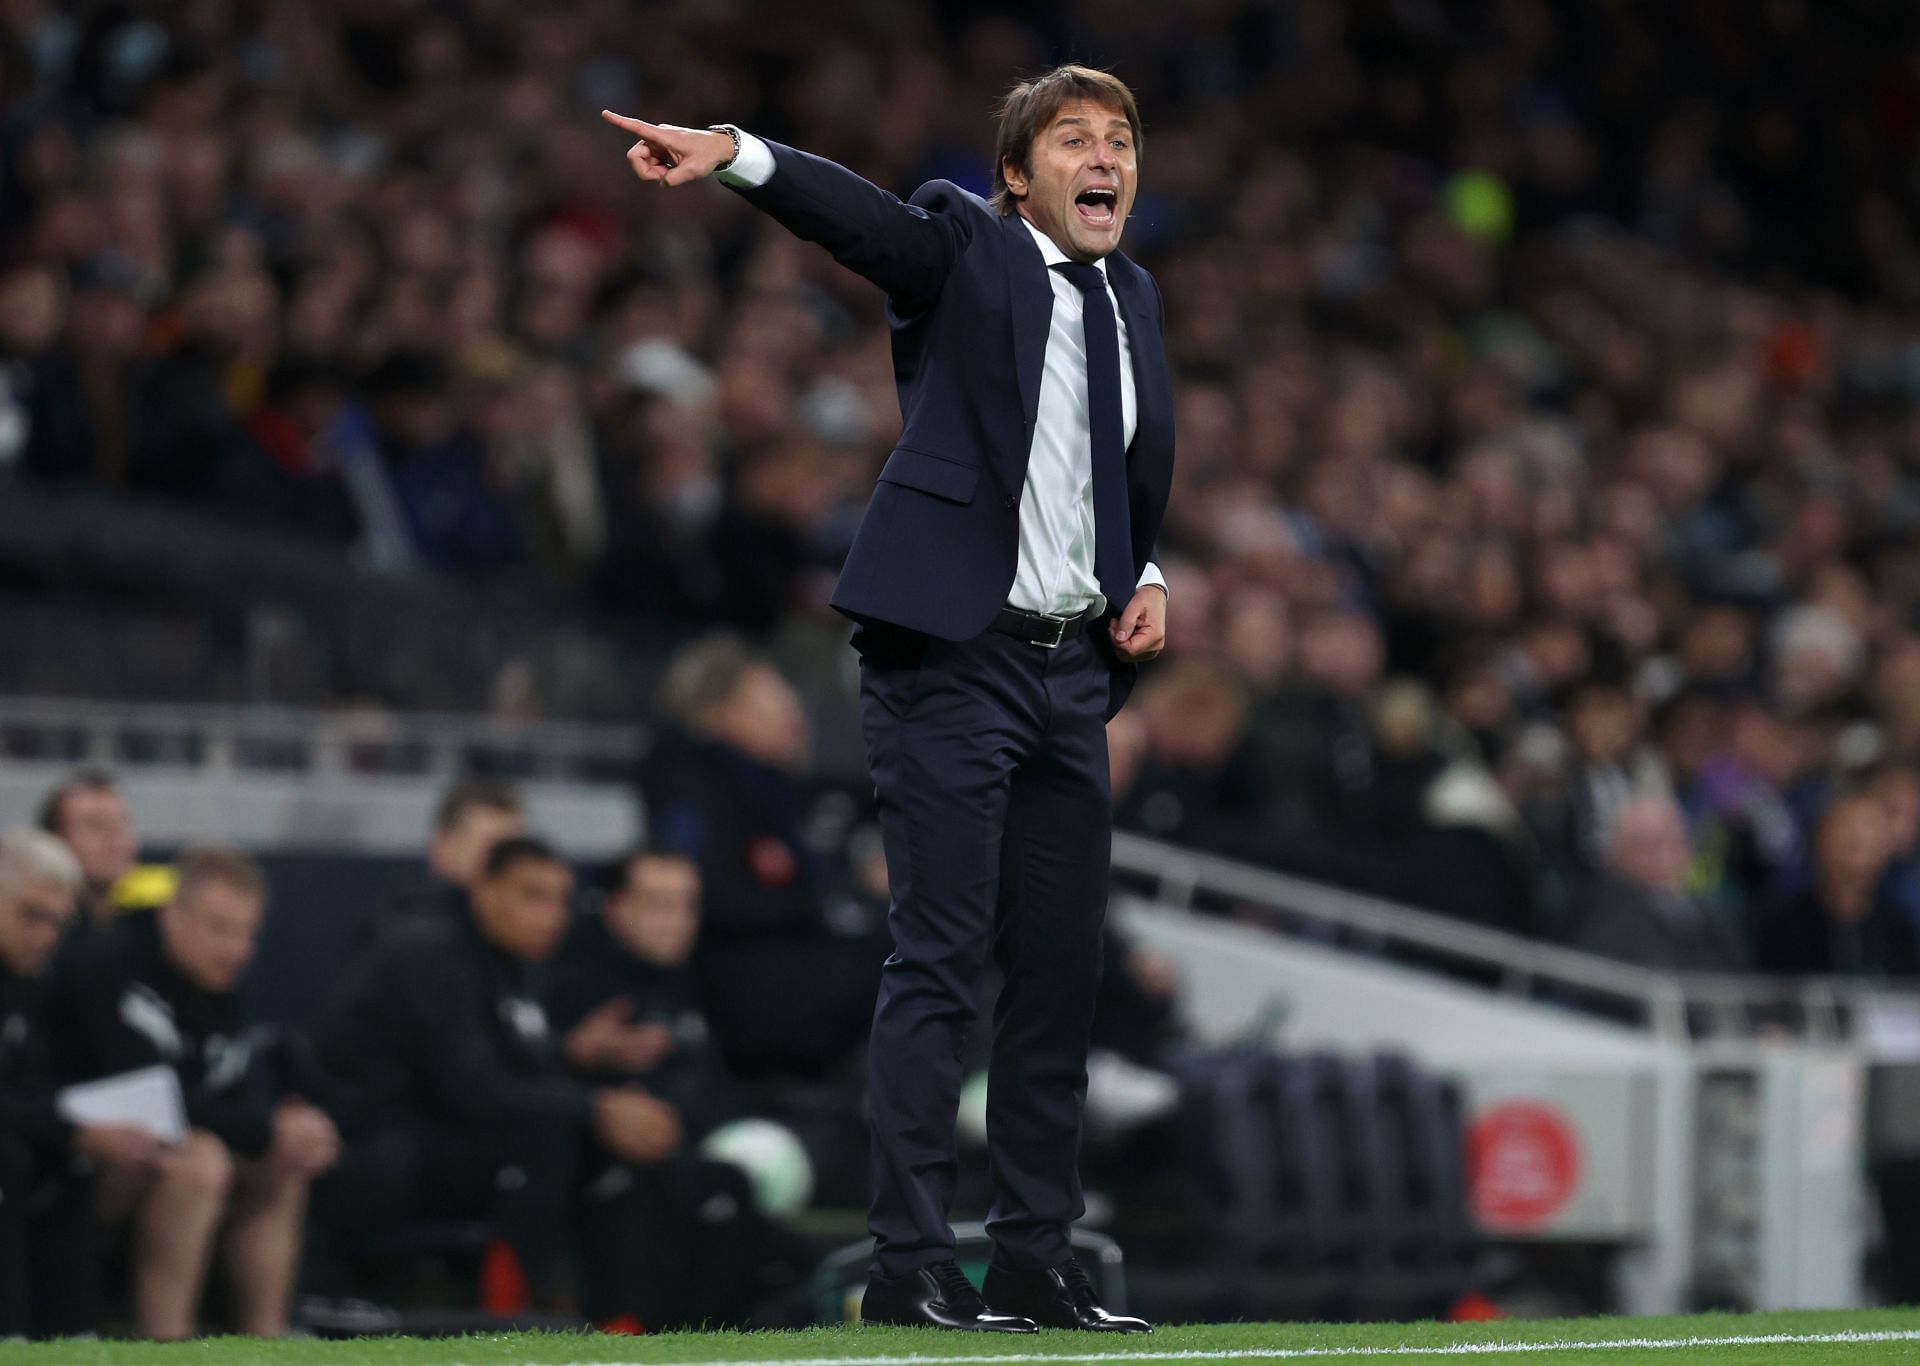 Antonio Conte is currently doing well at Spurs